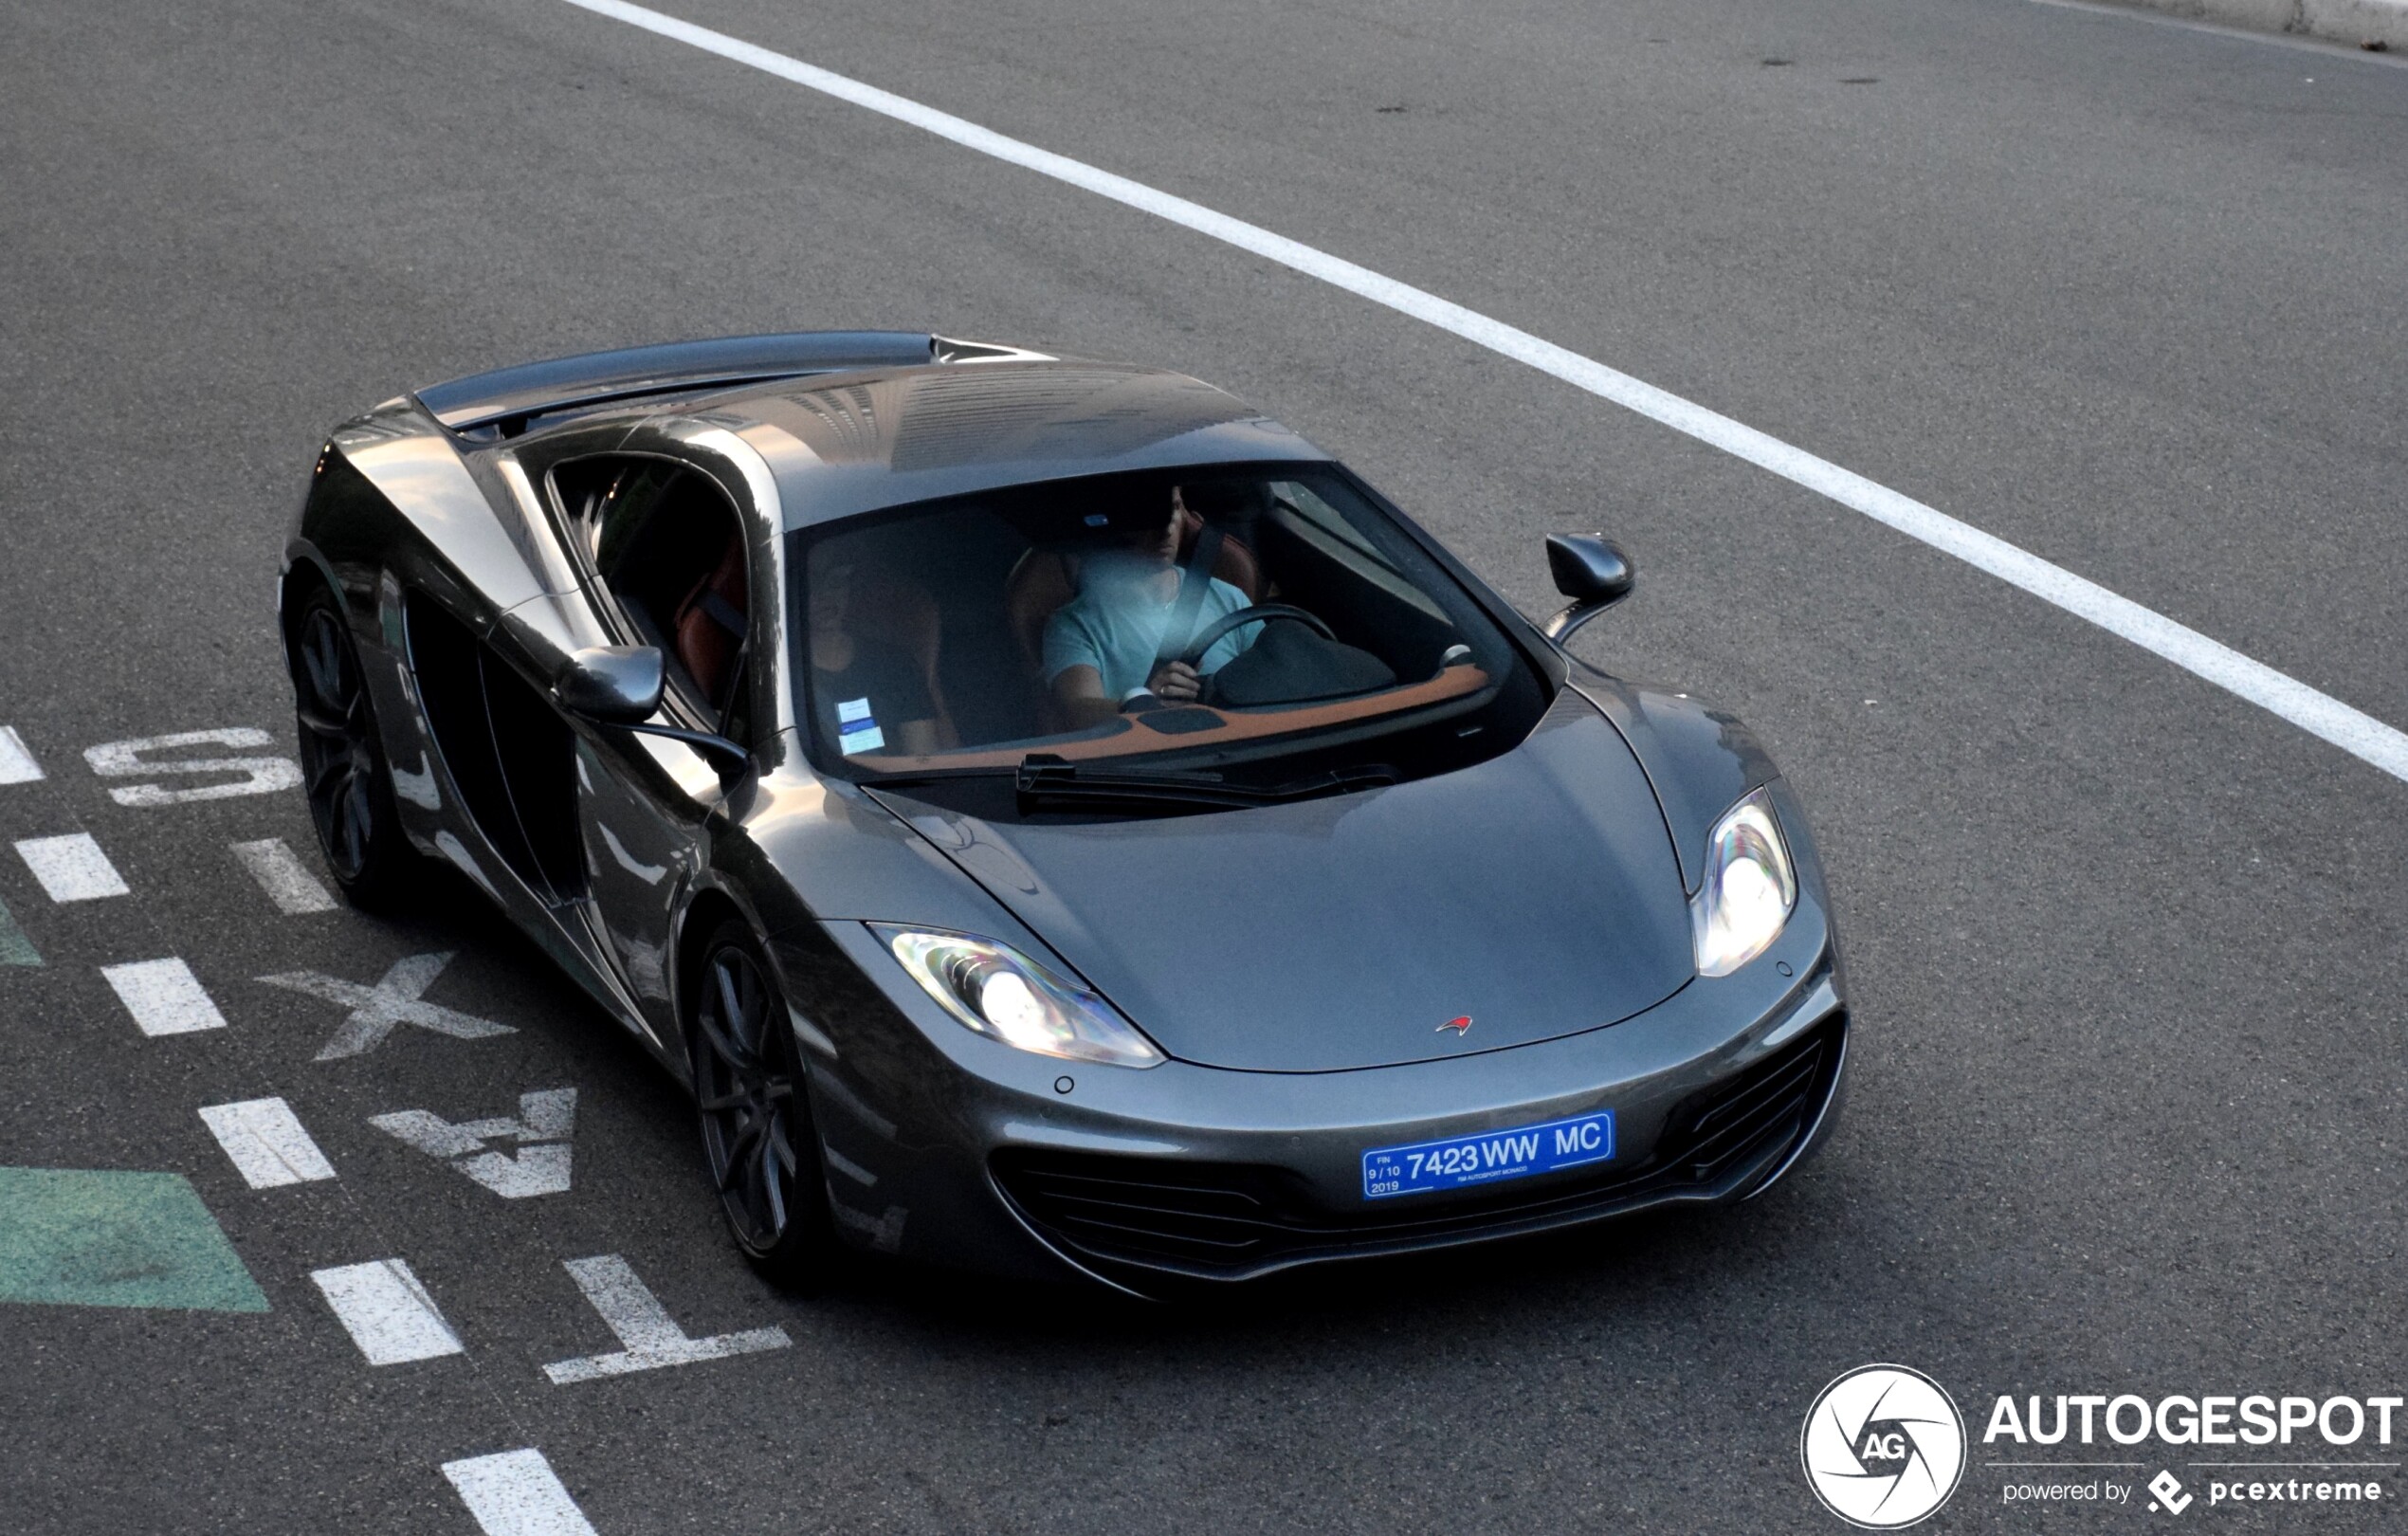 Mclaren 12C is where it all started (again)